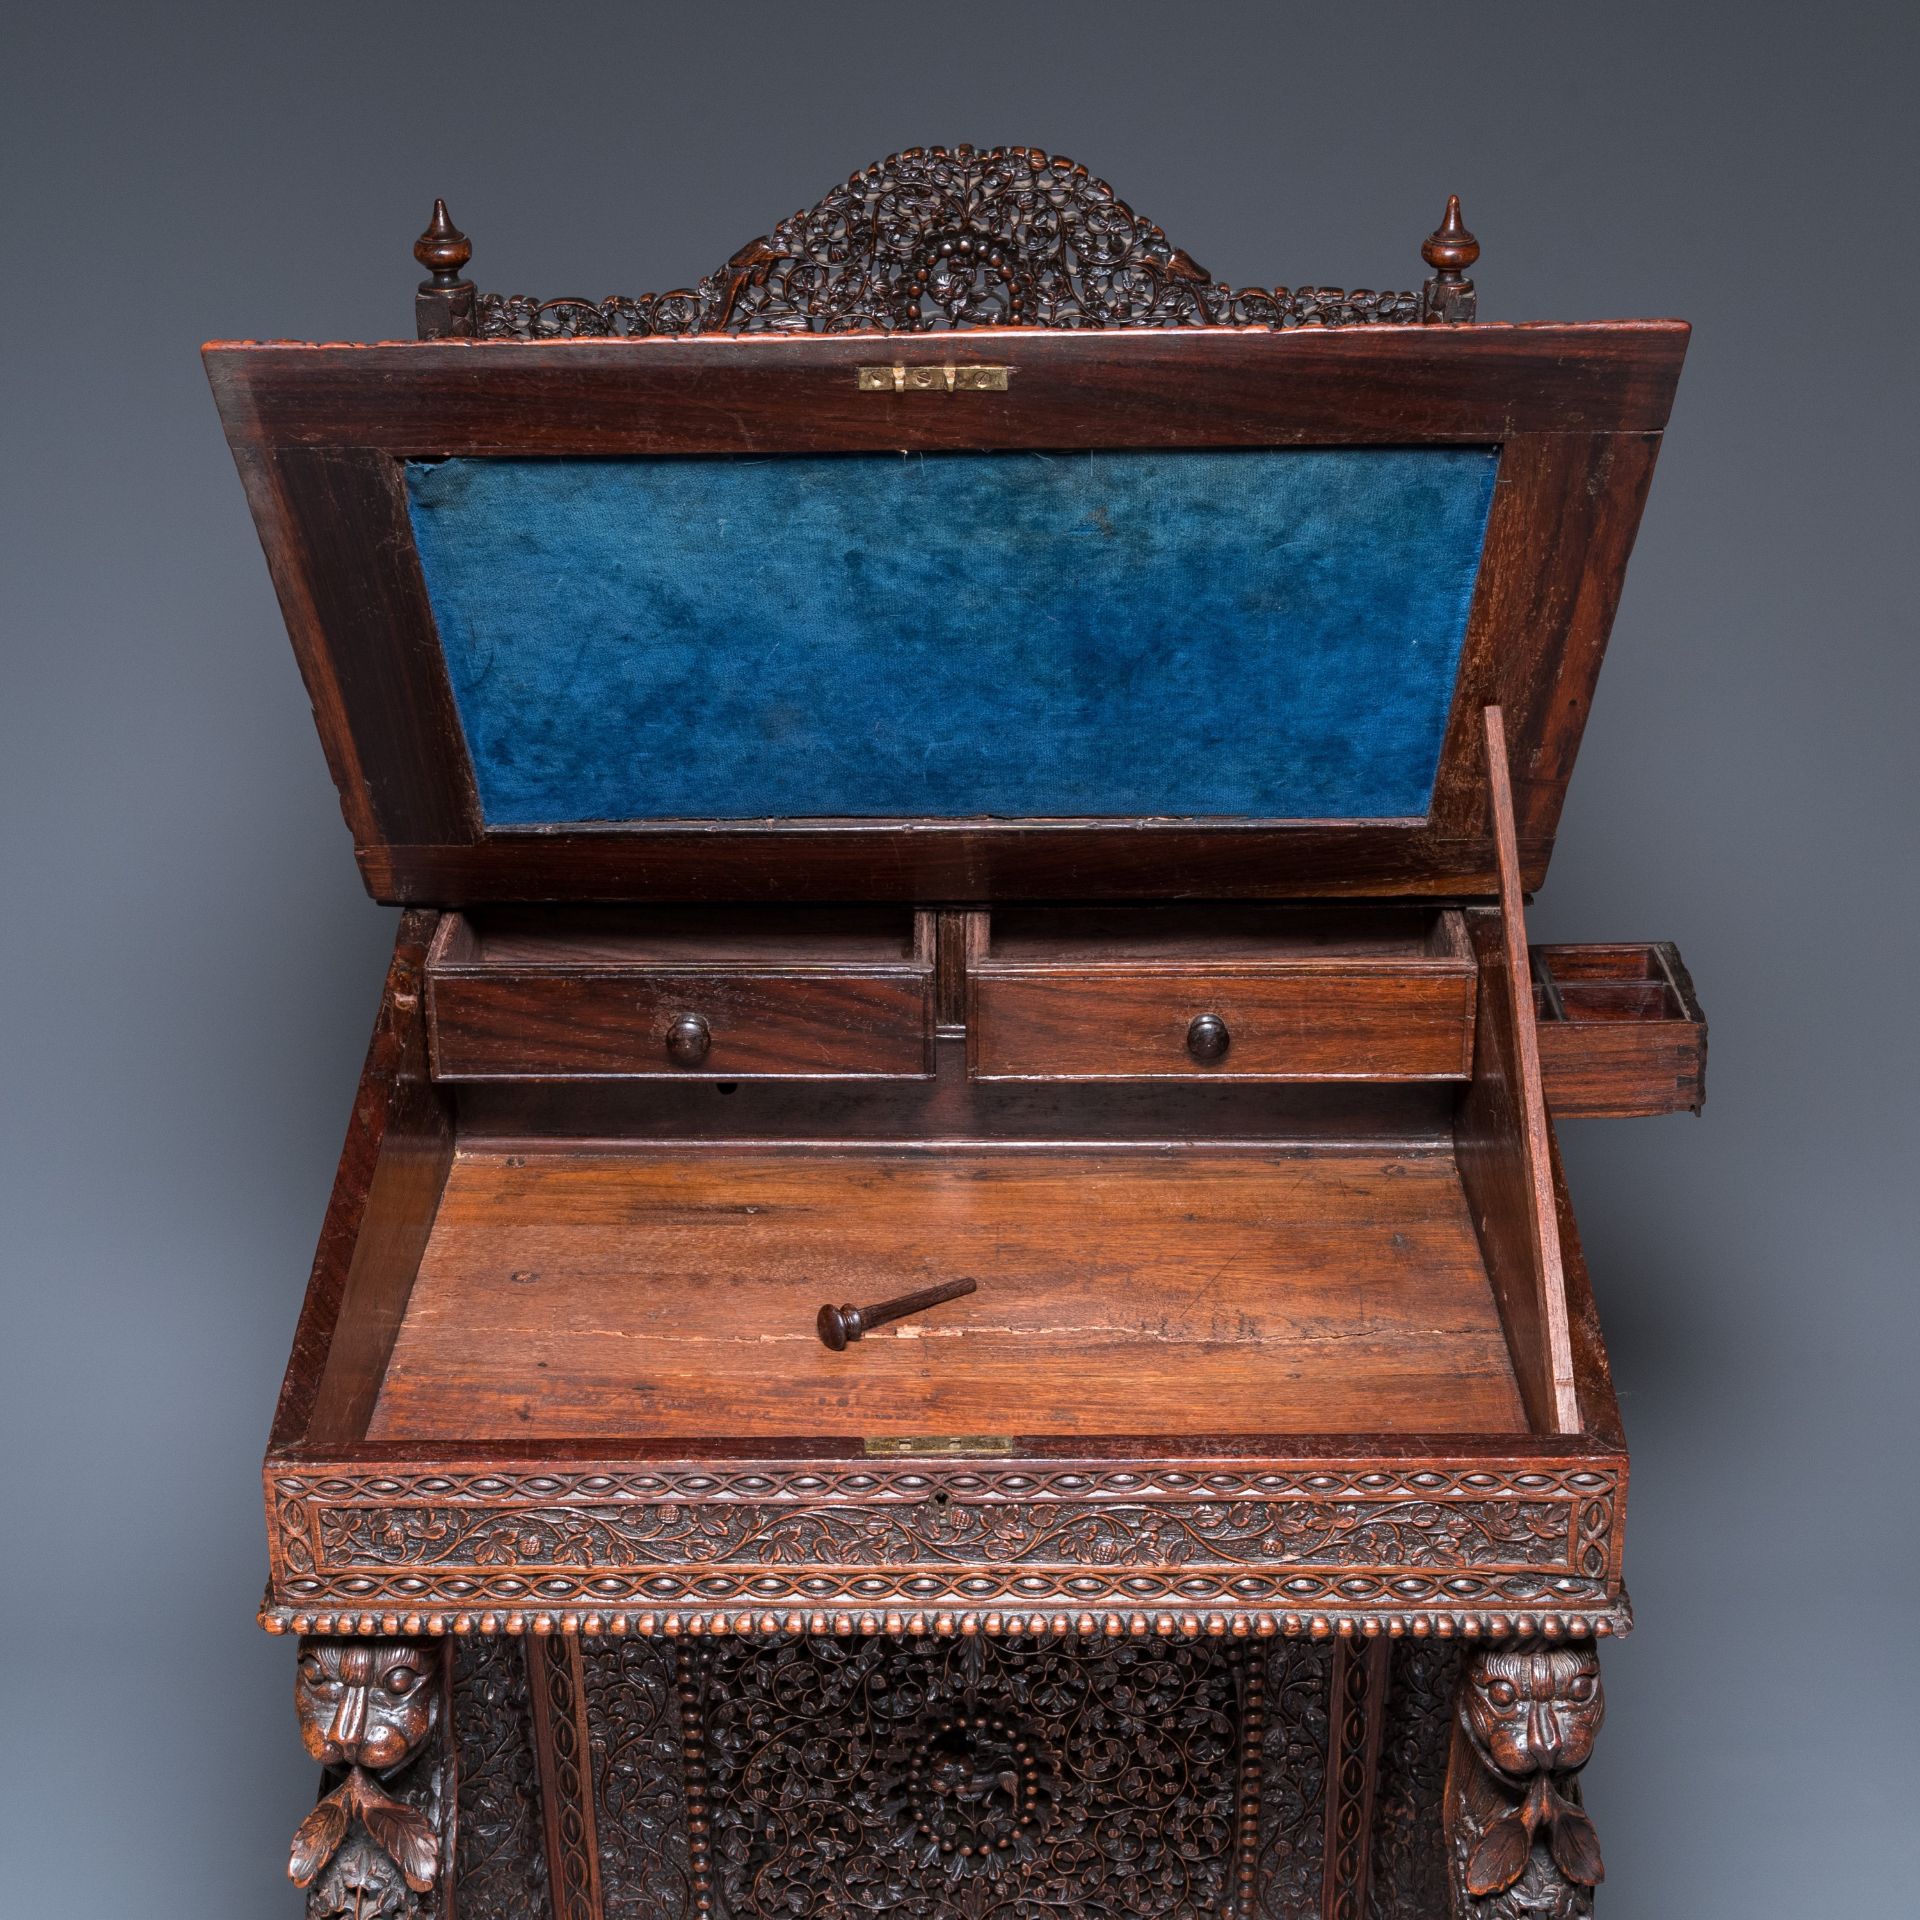 A colonial Anglo-Indian reticulated wooden desk with hidden compartment, 19th C. - Image 23 of 24